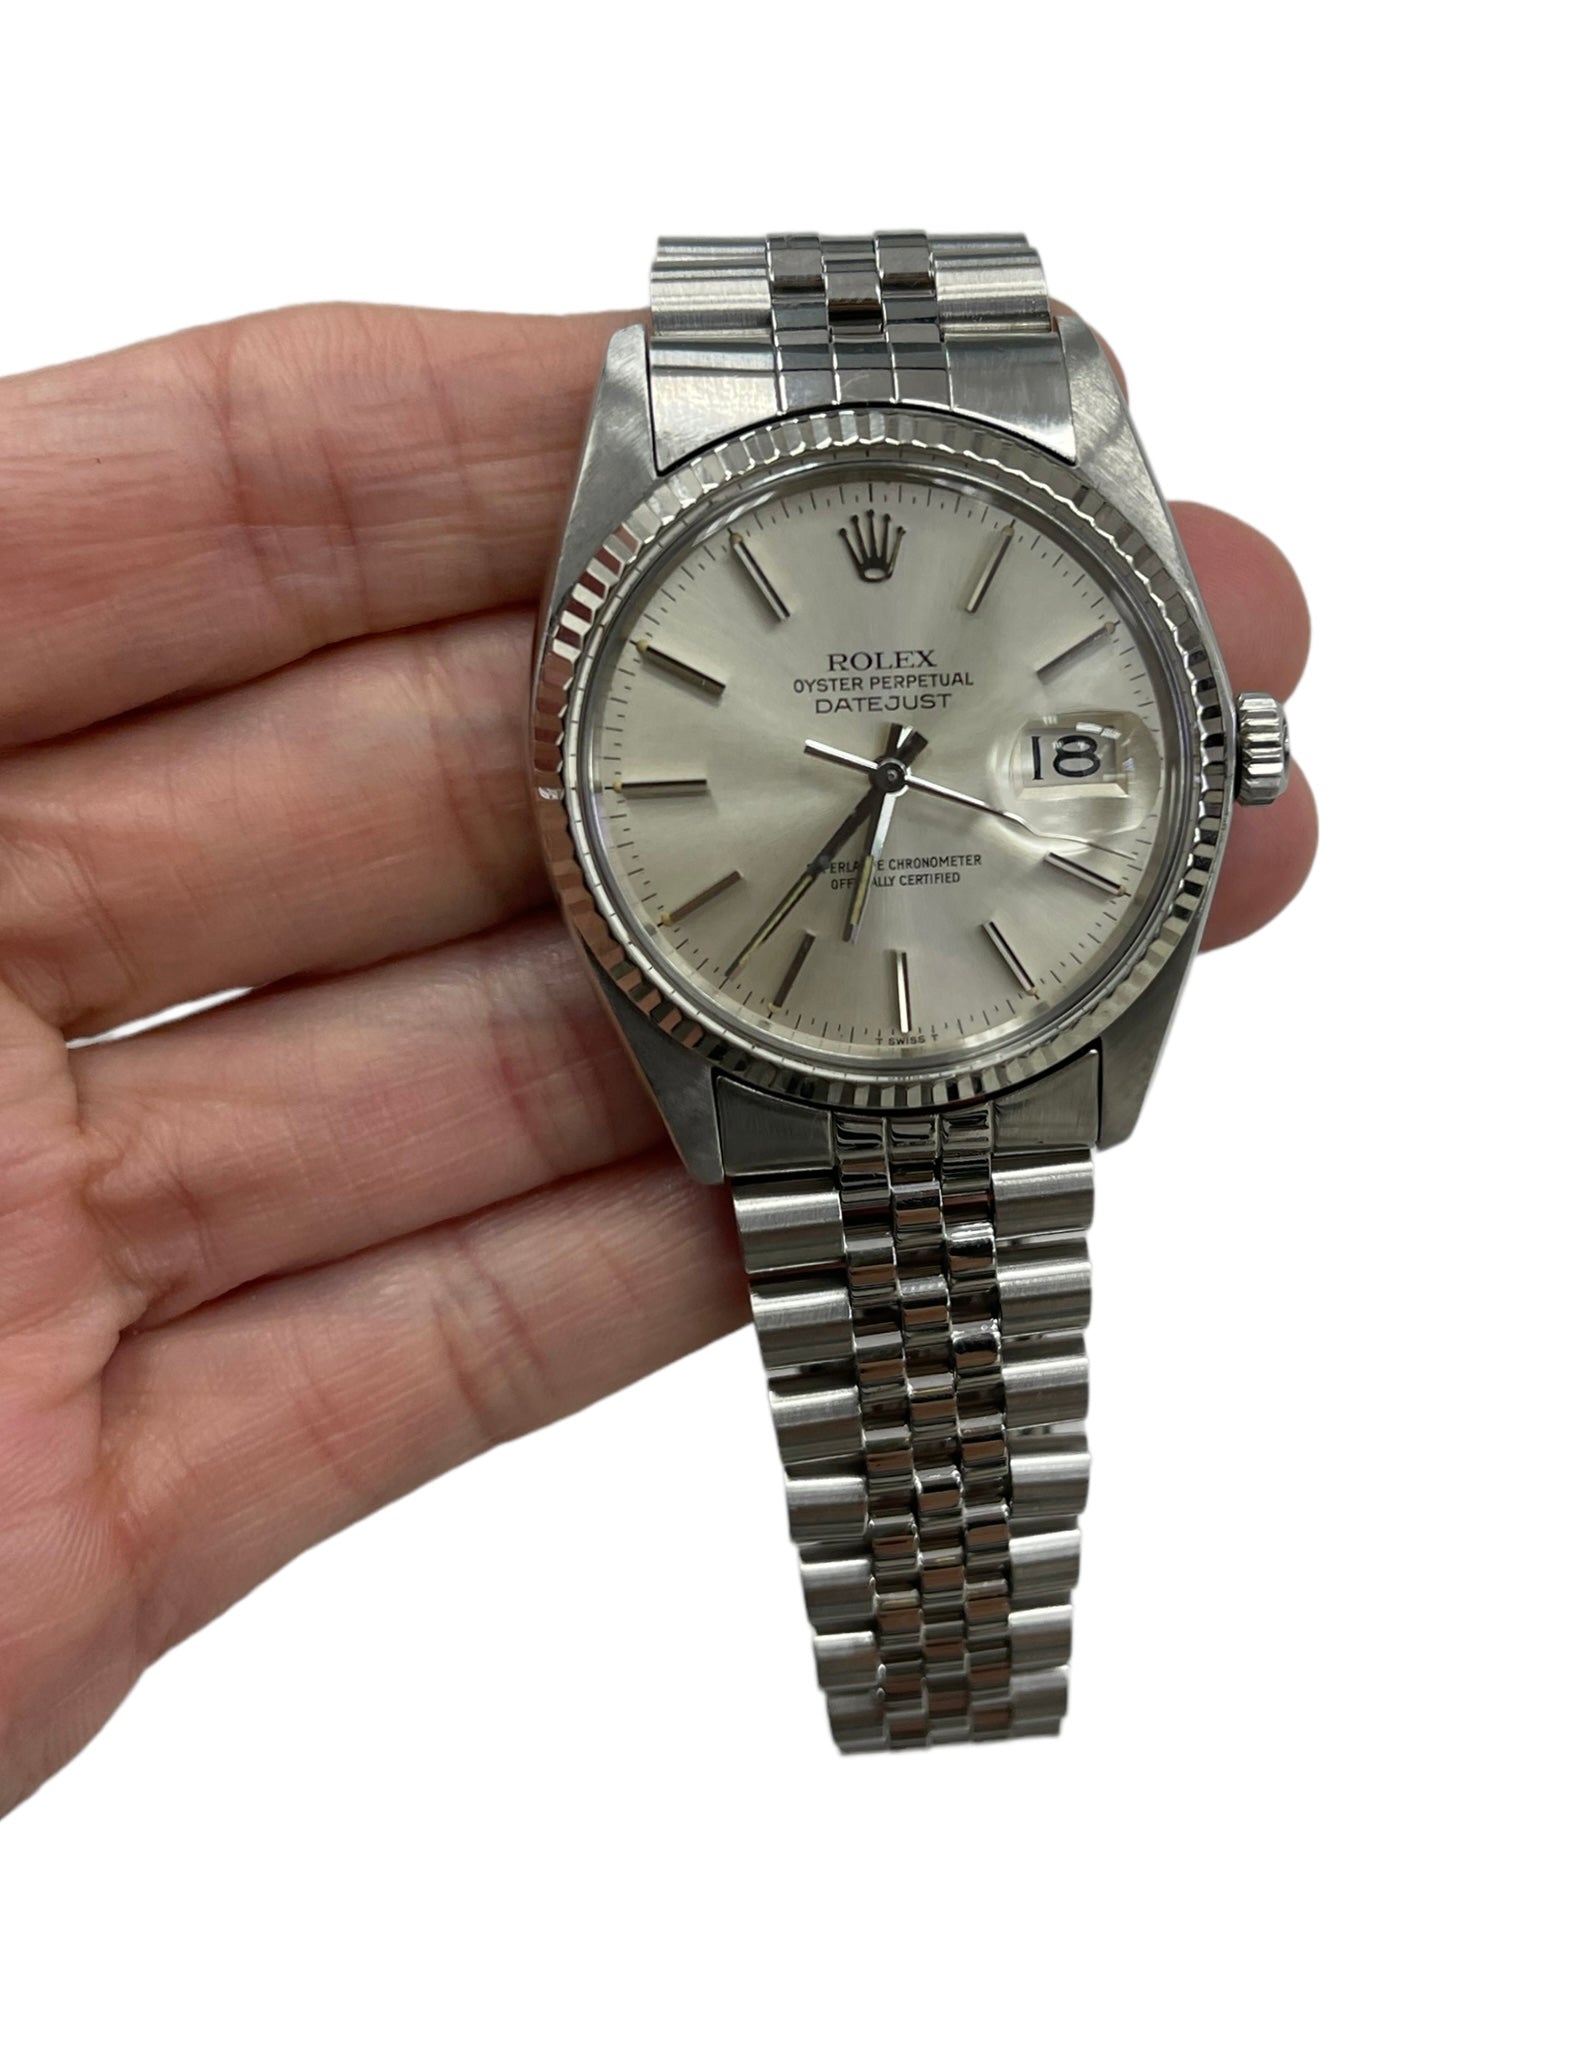 Rolex Datejust 36mm 16014 Silver Dial with White Gold Fluted Bezel